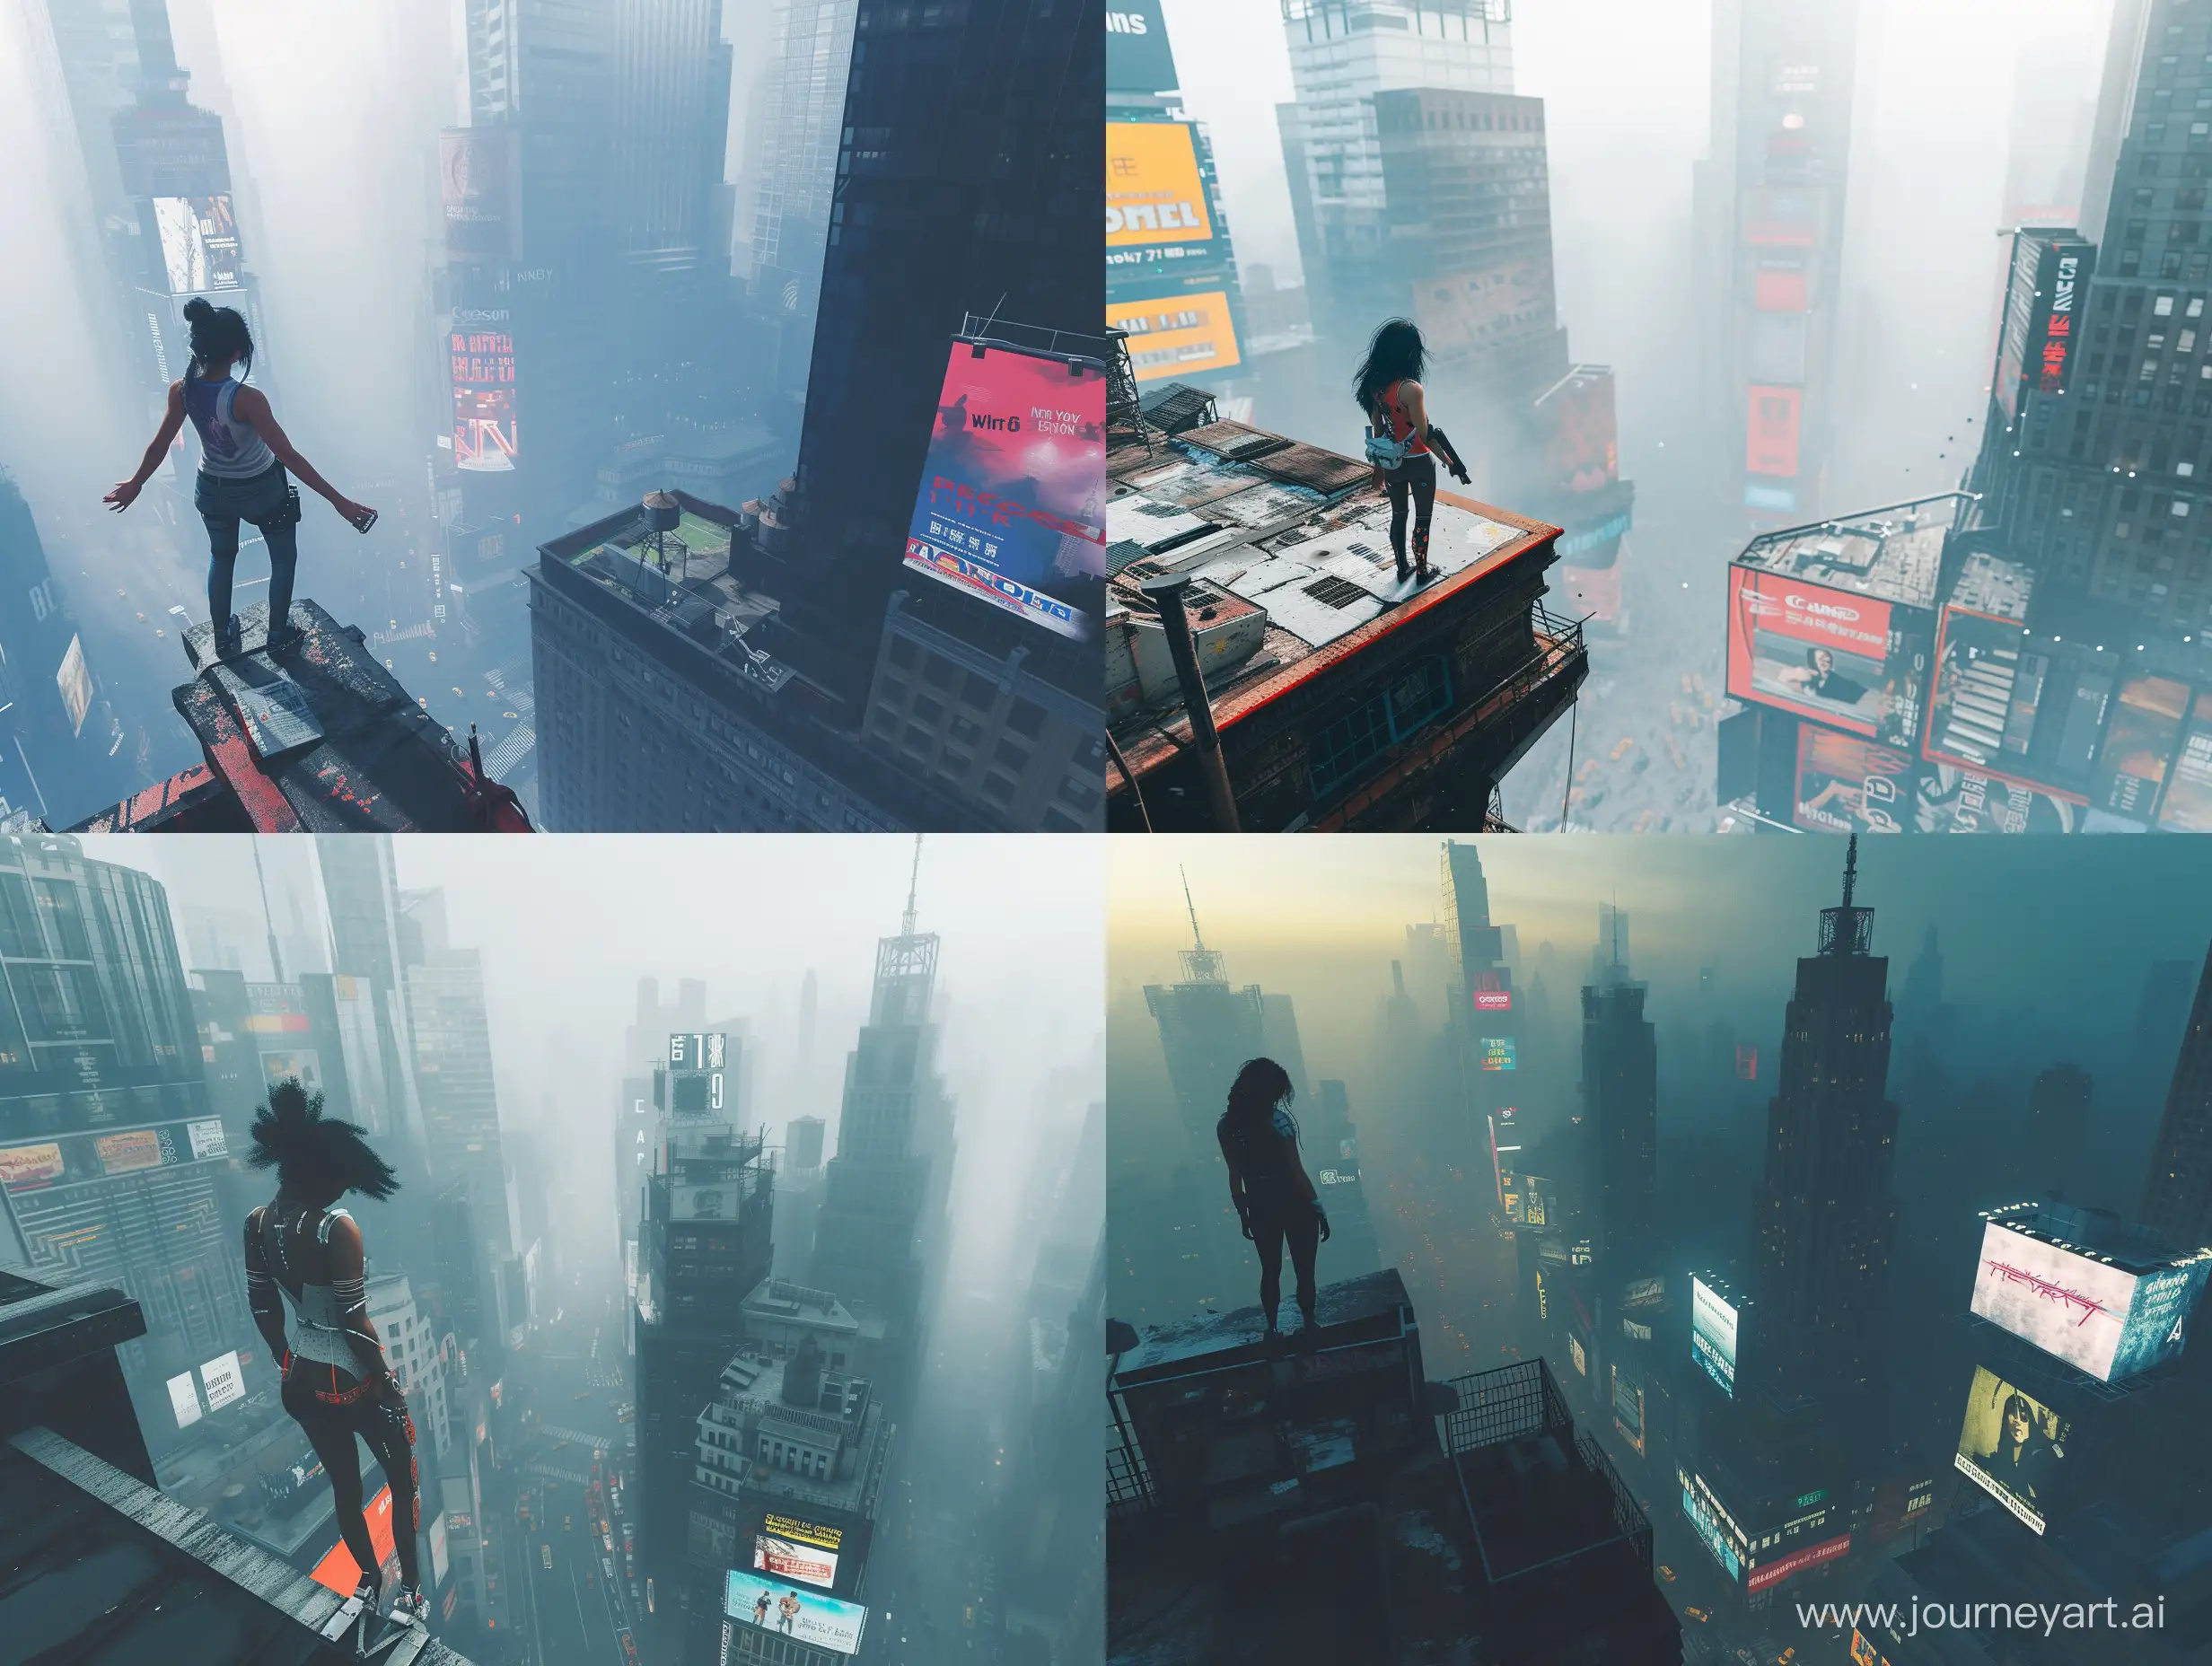 a bustling Procedural new new york city, the photo is bathed in natural lighting, relaxing setting. Shot in 4k with a high end DSLR camera. such as a Canon EOS R5 with a 50mm f/1. 2 lens, architecture, drone view, skyline, a woman is standing on the edge of a rooftop, vivid, foggy, dystopian, science fiction, she has a bionic arm, full view, skyline, billboards, nature, 
